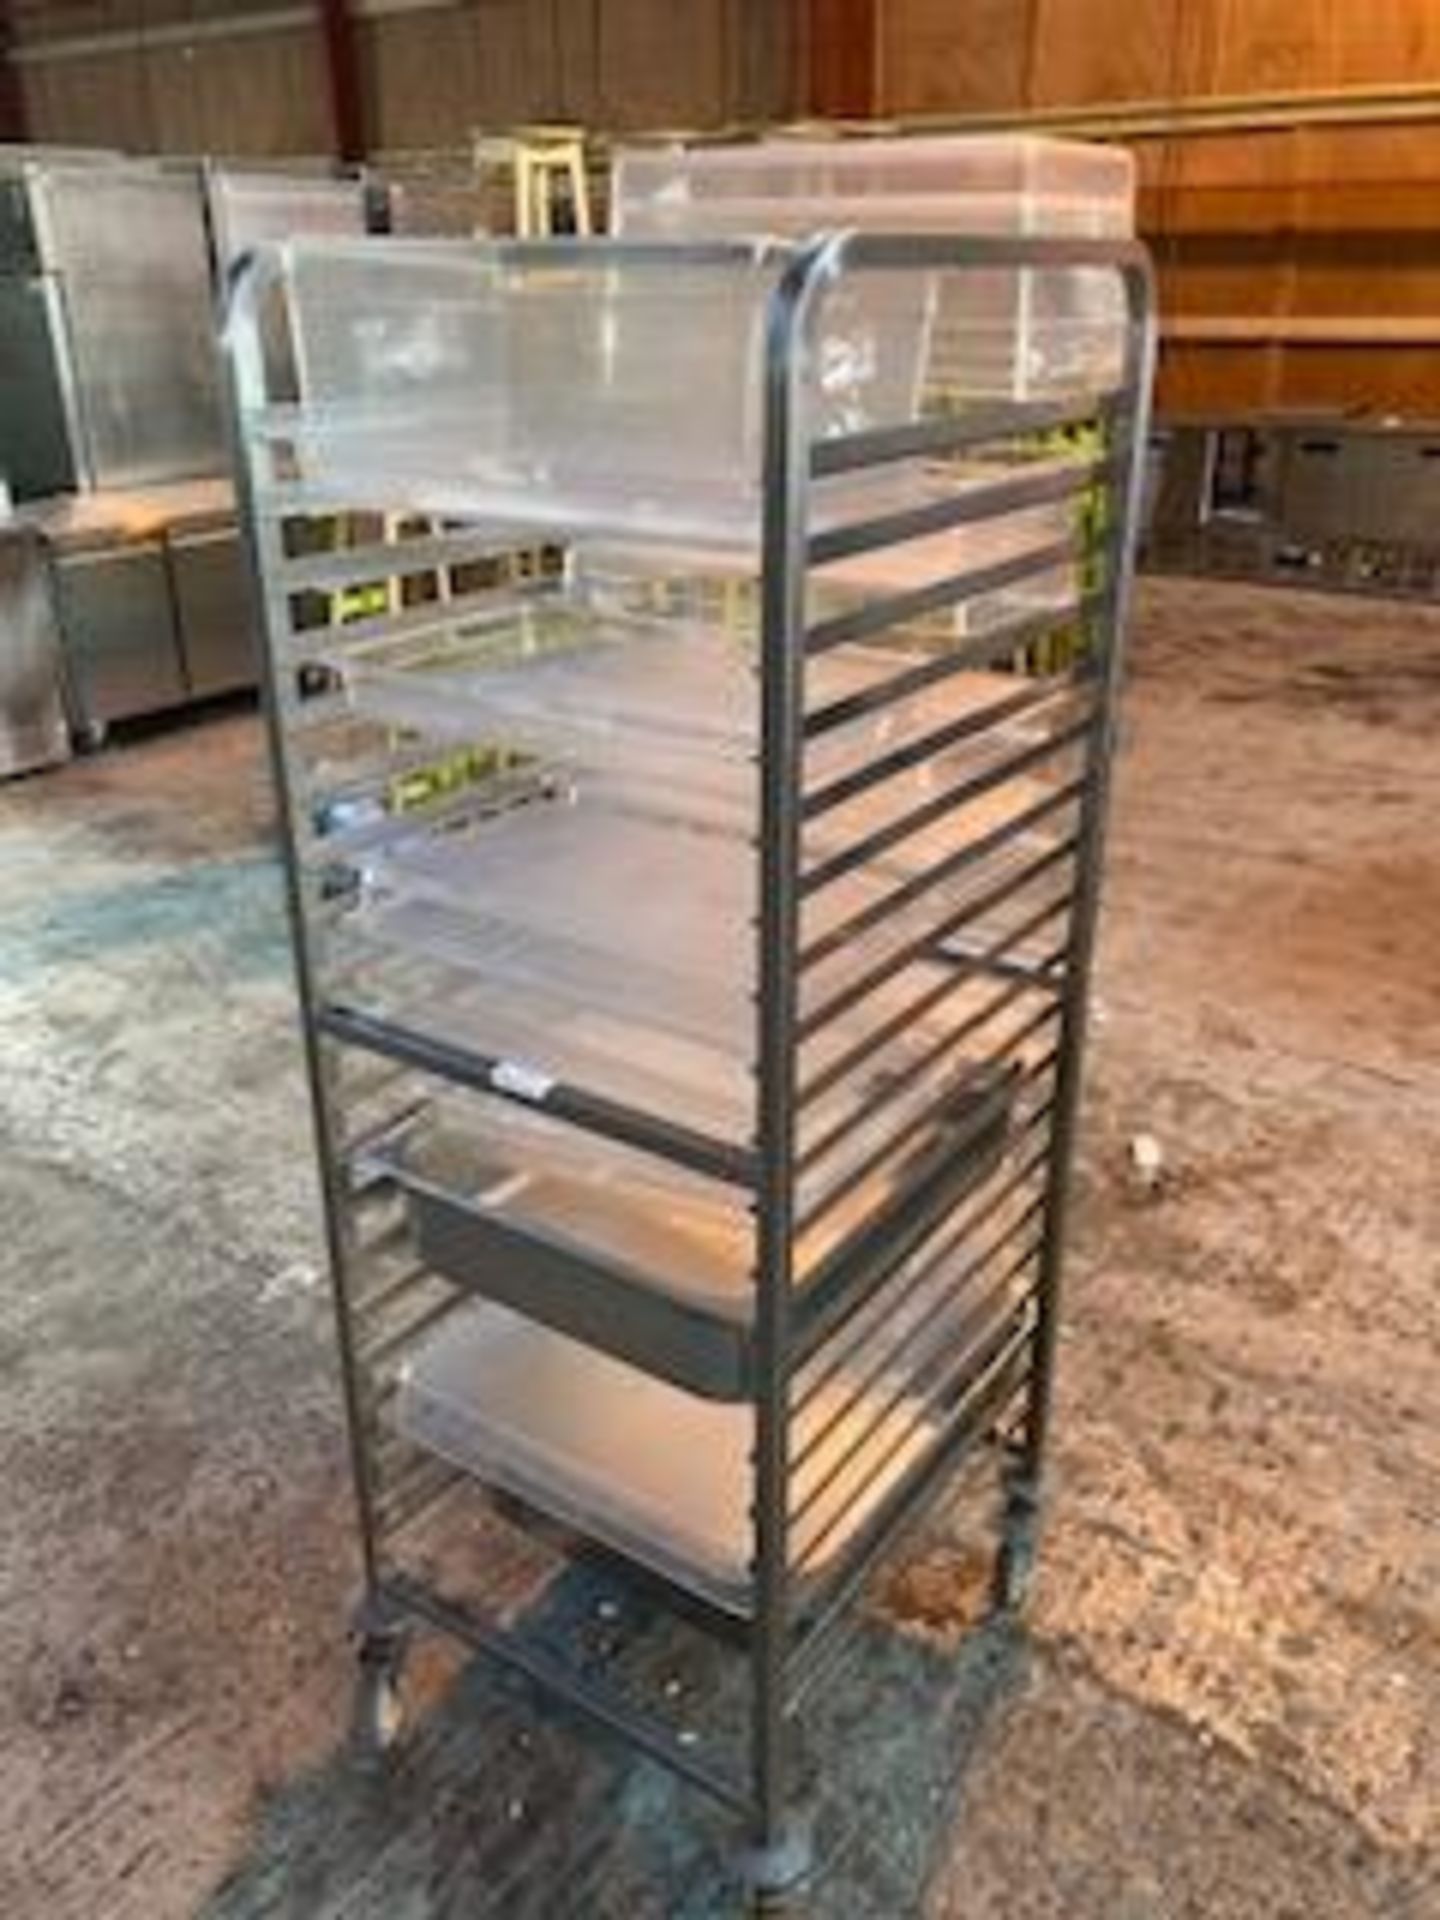 Stainless steel Gastronorm Rack /Tray / Pan Trolley & Trays - Image 2 of 3